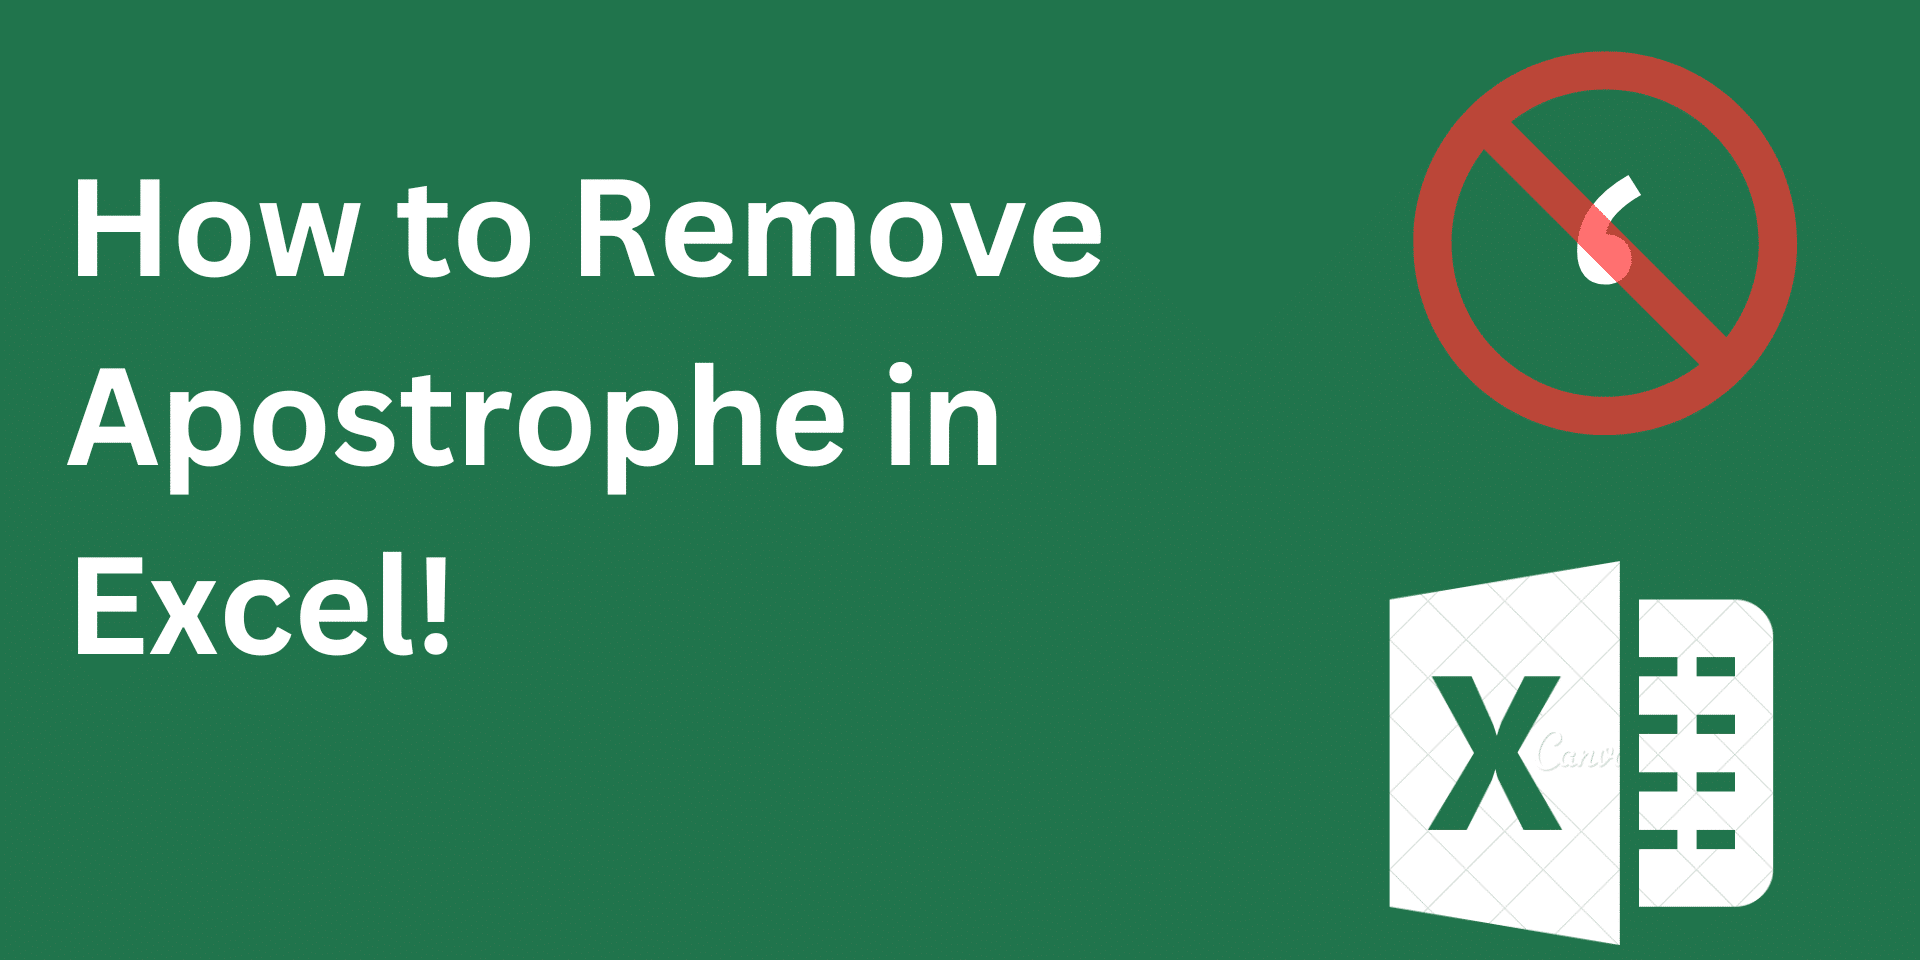 How to Remove Apostrophe in Excel